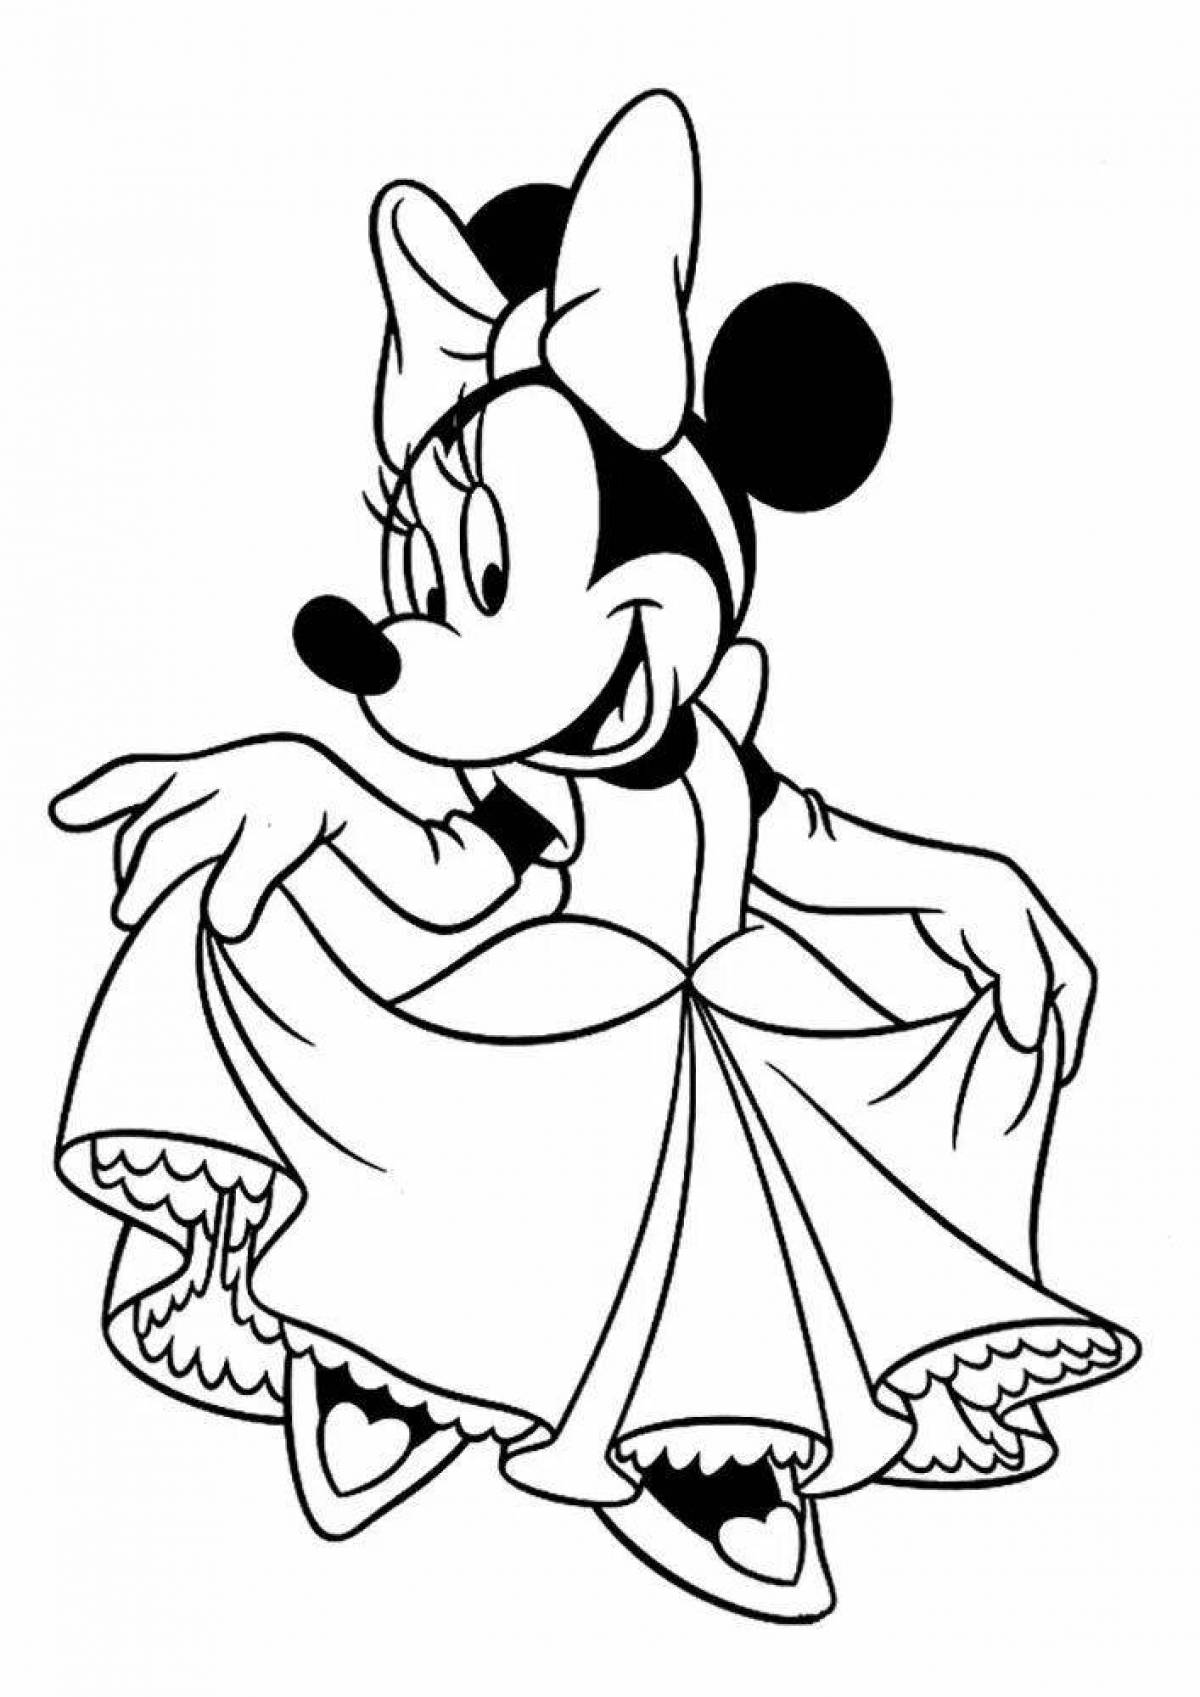 Smart mouse cartoon coloring book